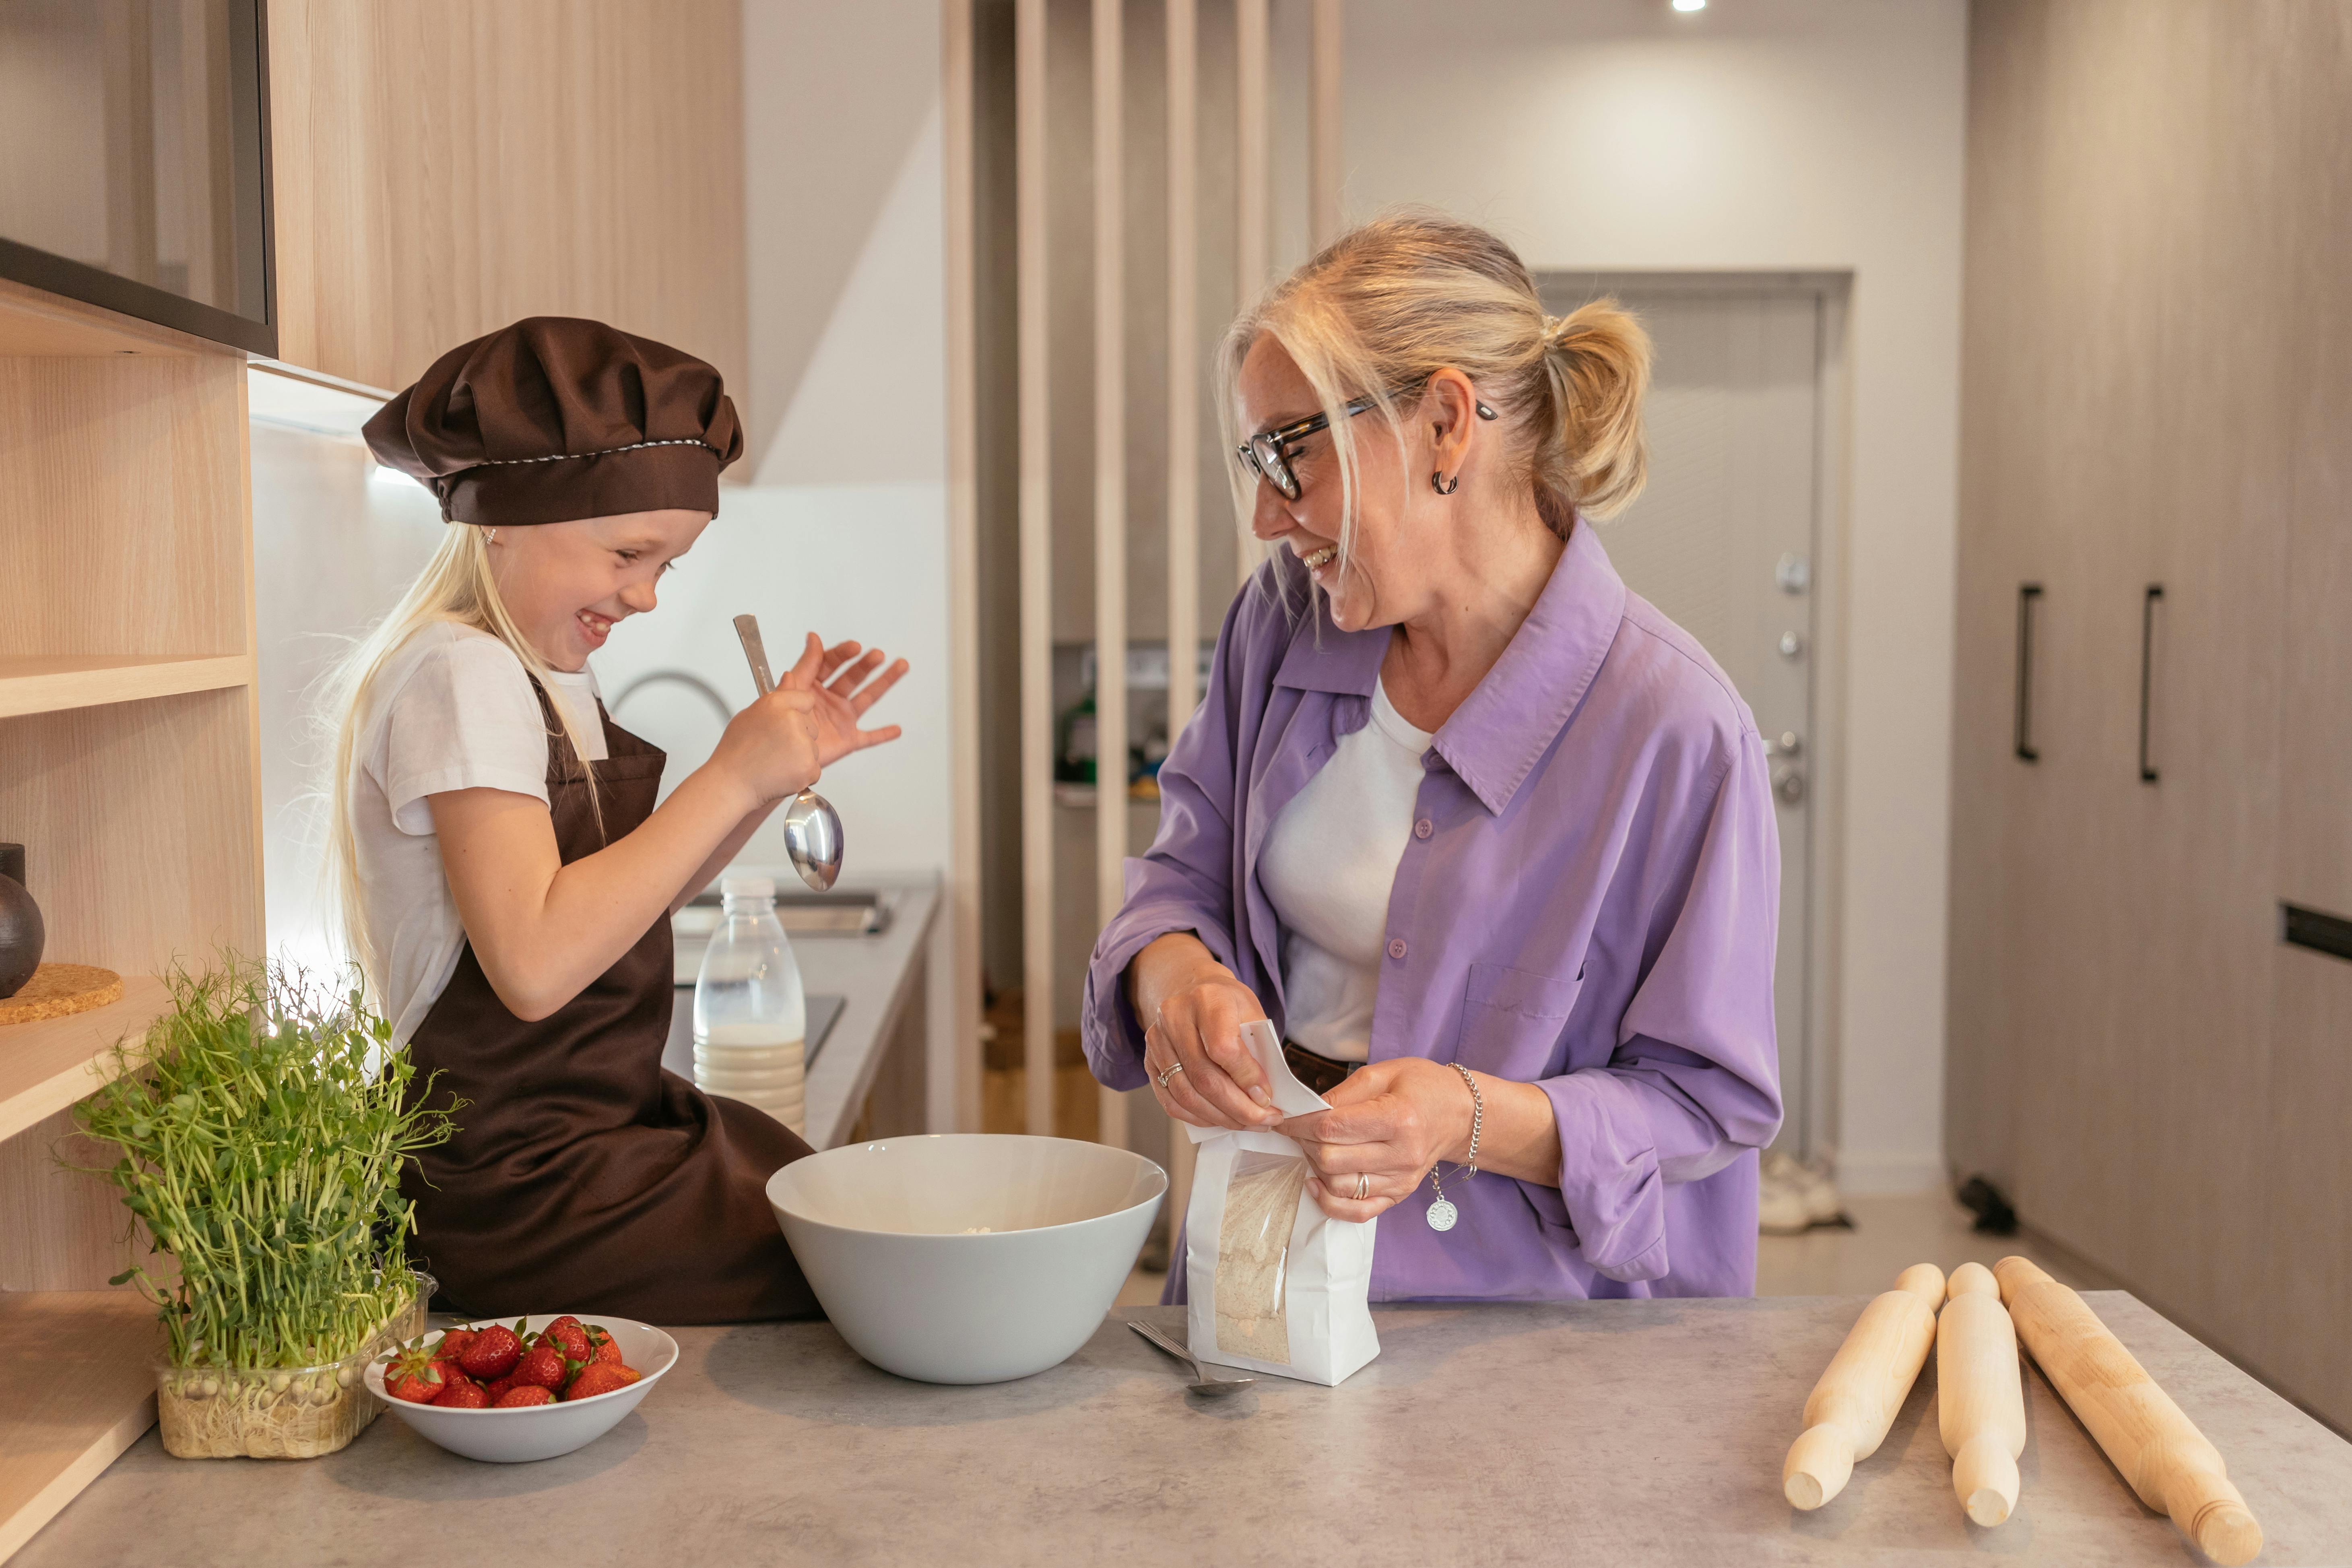 A woman cooking with her granddaughter | Source: Pexels